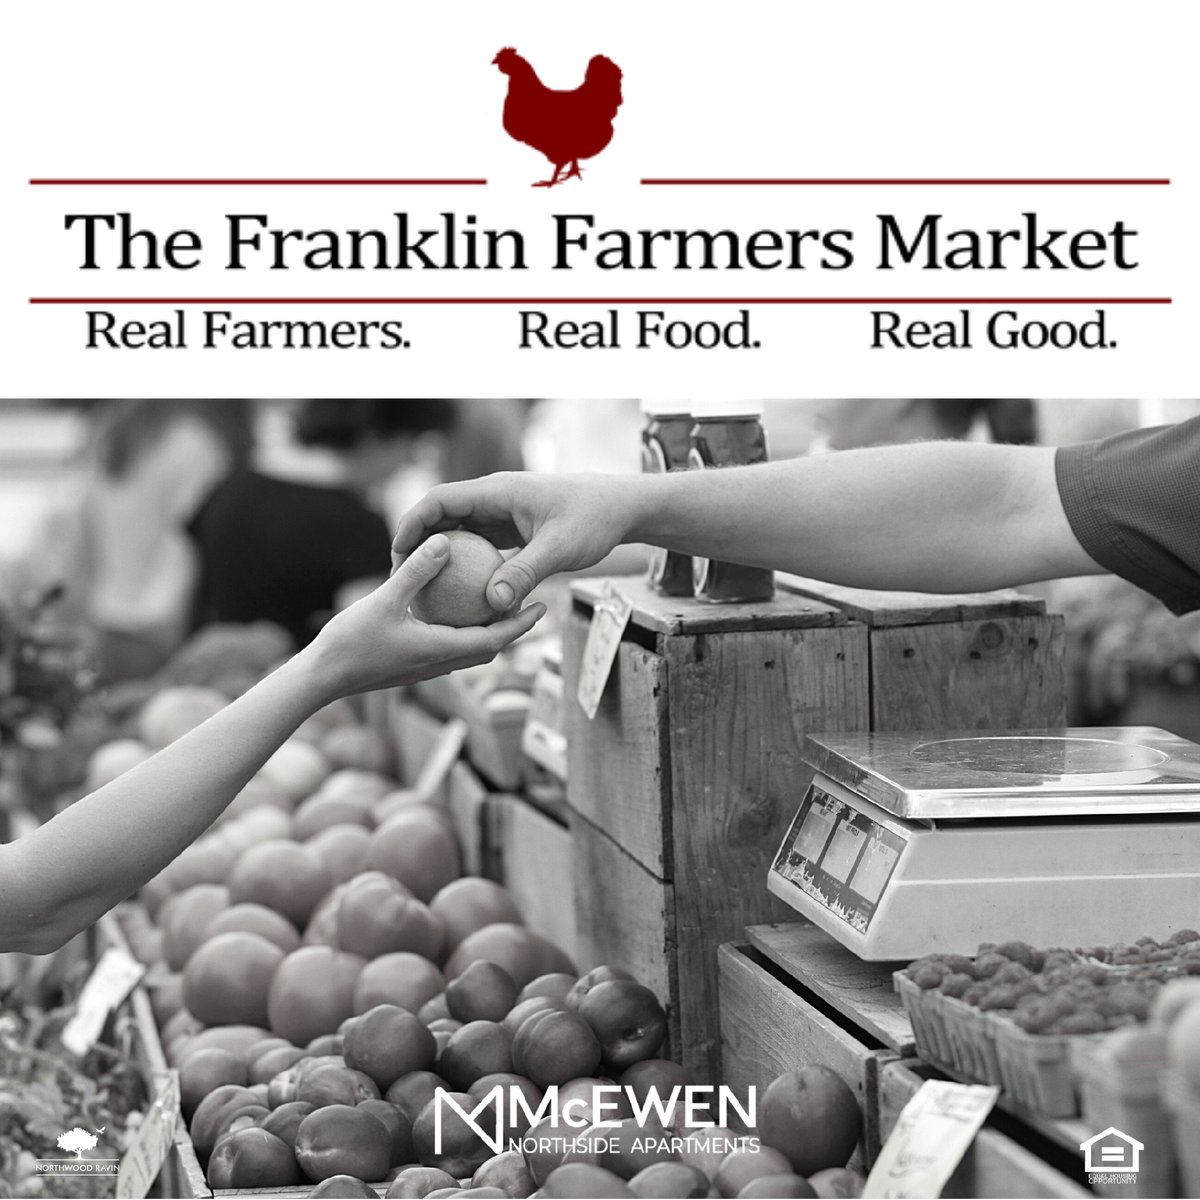 Plans this Saturday morning? Head down to the farmers market at the Factory at Franklin. Opens at 8AM, so start your day off right and shop local!
.
.
.
#FactoryatFranklin #FarmersMarket #FranklinTN #OldSoulNewSpirit #LiveMcEwenNorthside #ThisisNWRLiving #SupportLocal